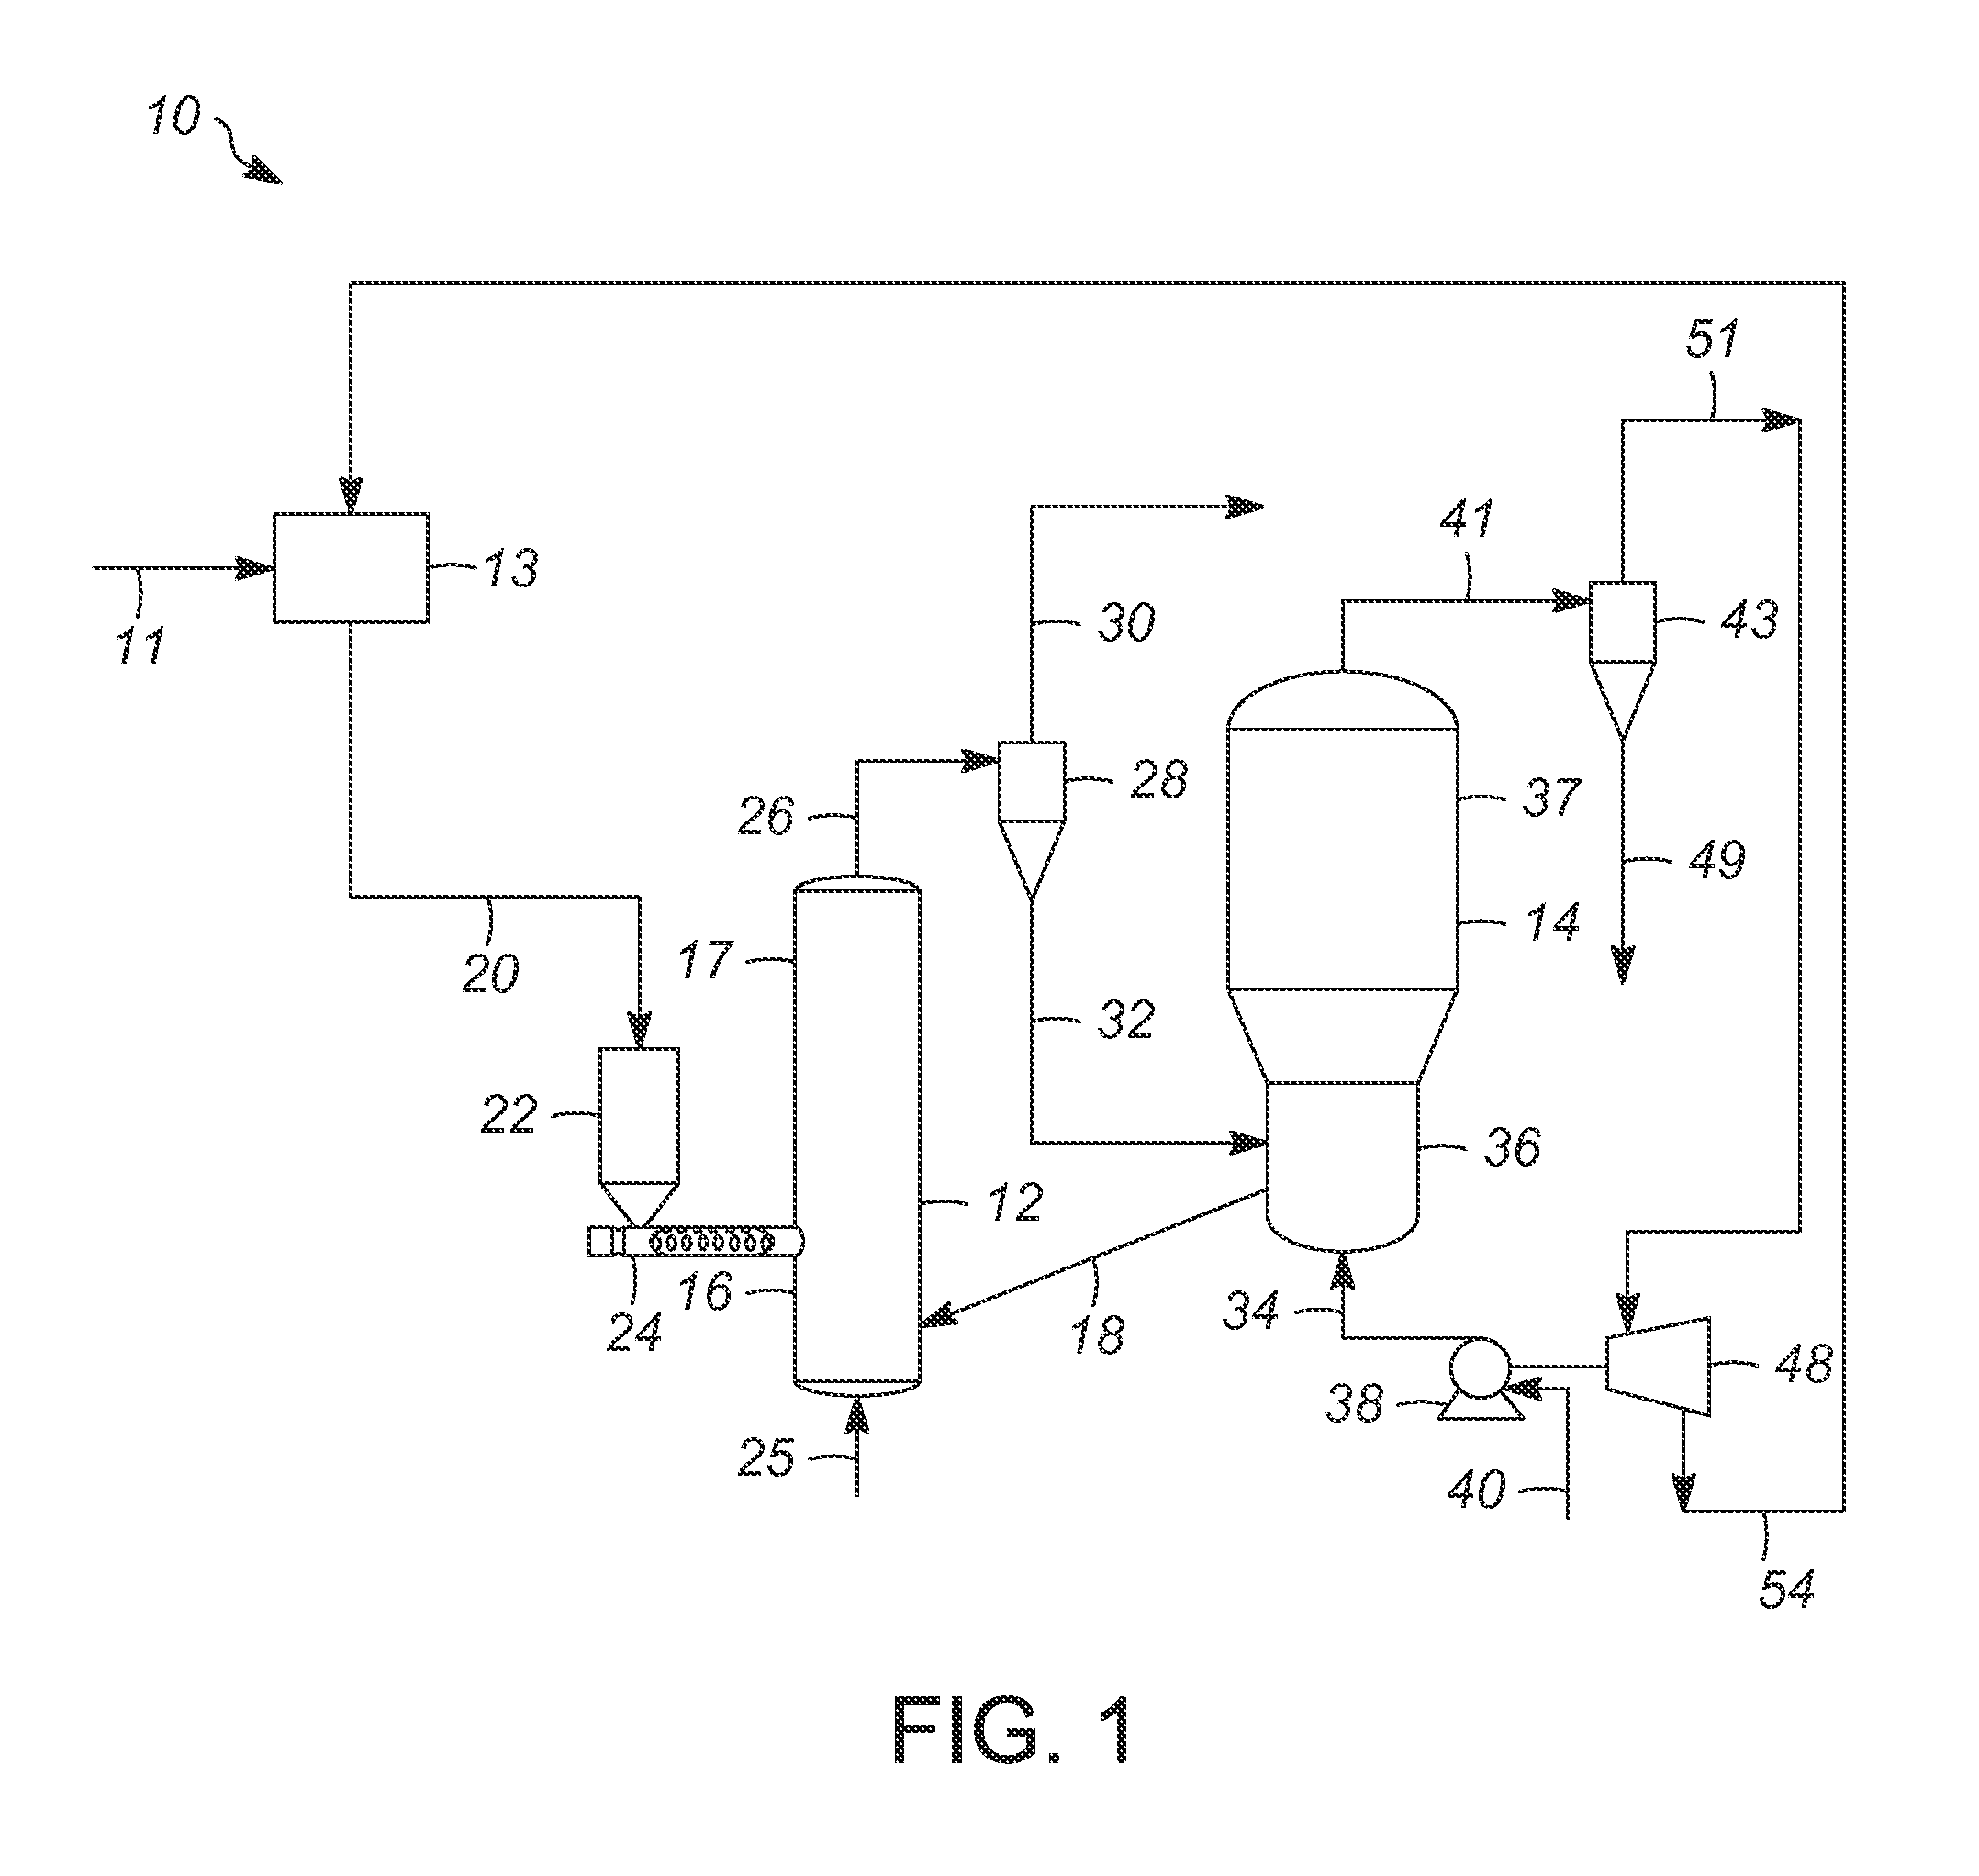 Methods and apparatuses for rapid thermal processing of carbonaceous material